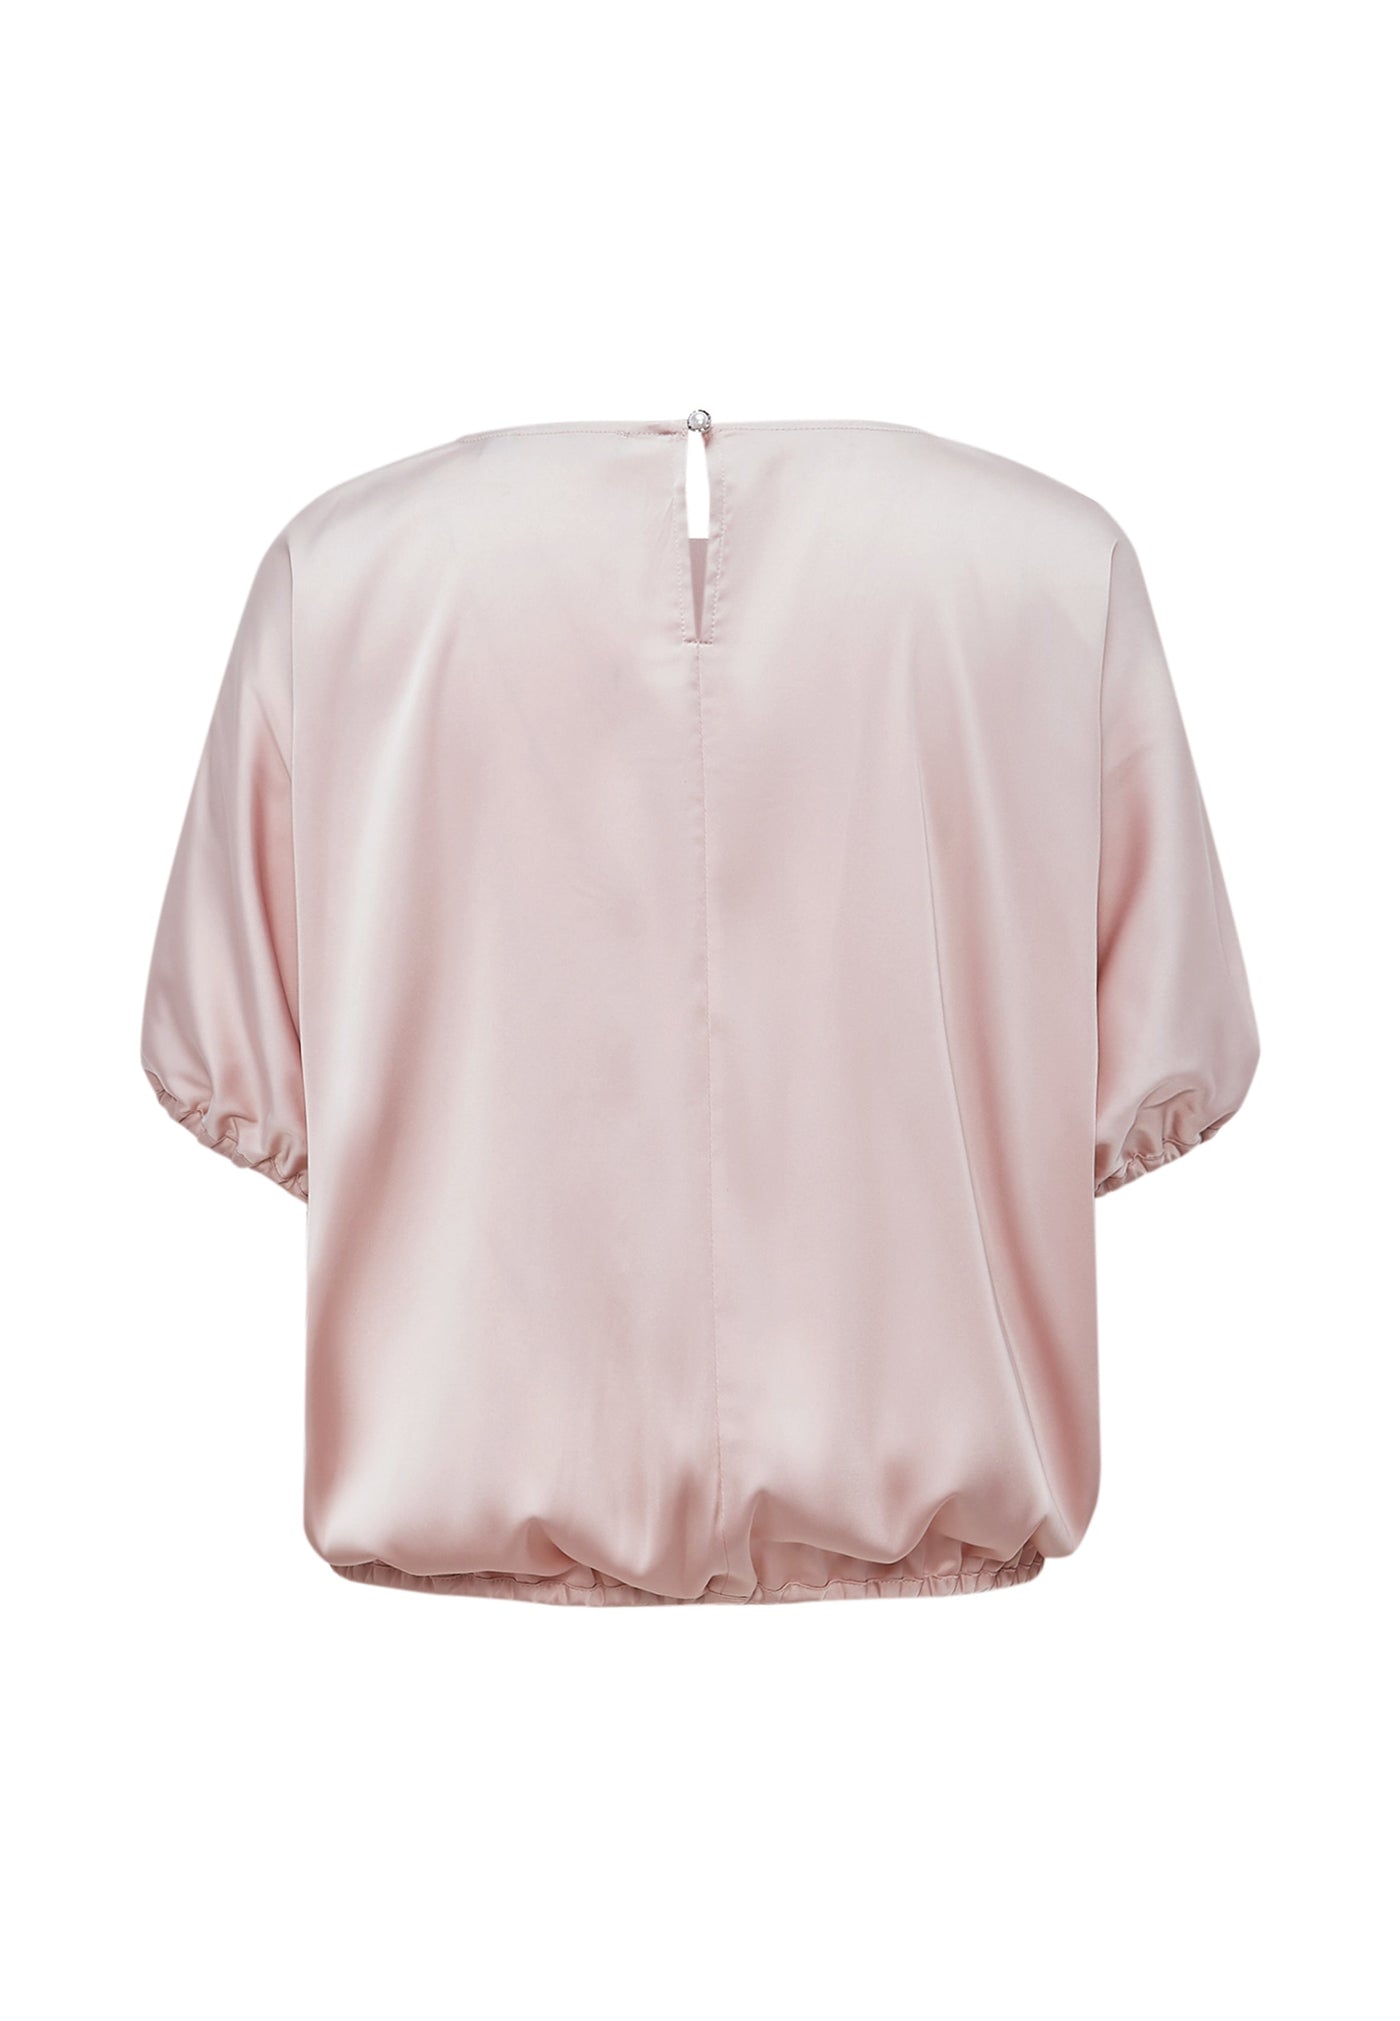 Women Clothing Poly Stretch Satin Blouse Relaxed Fit